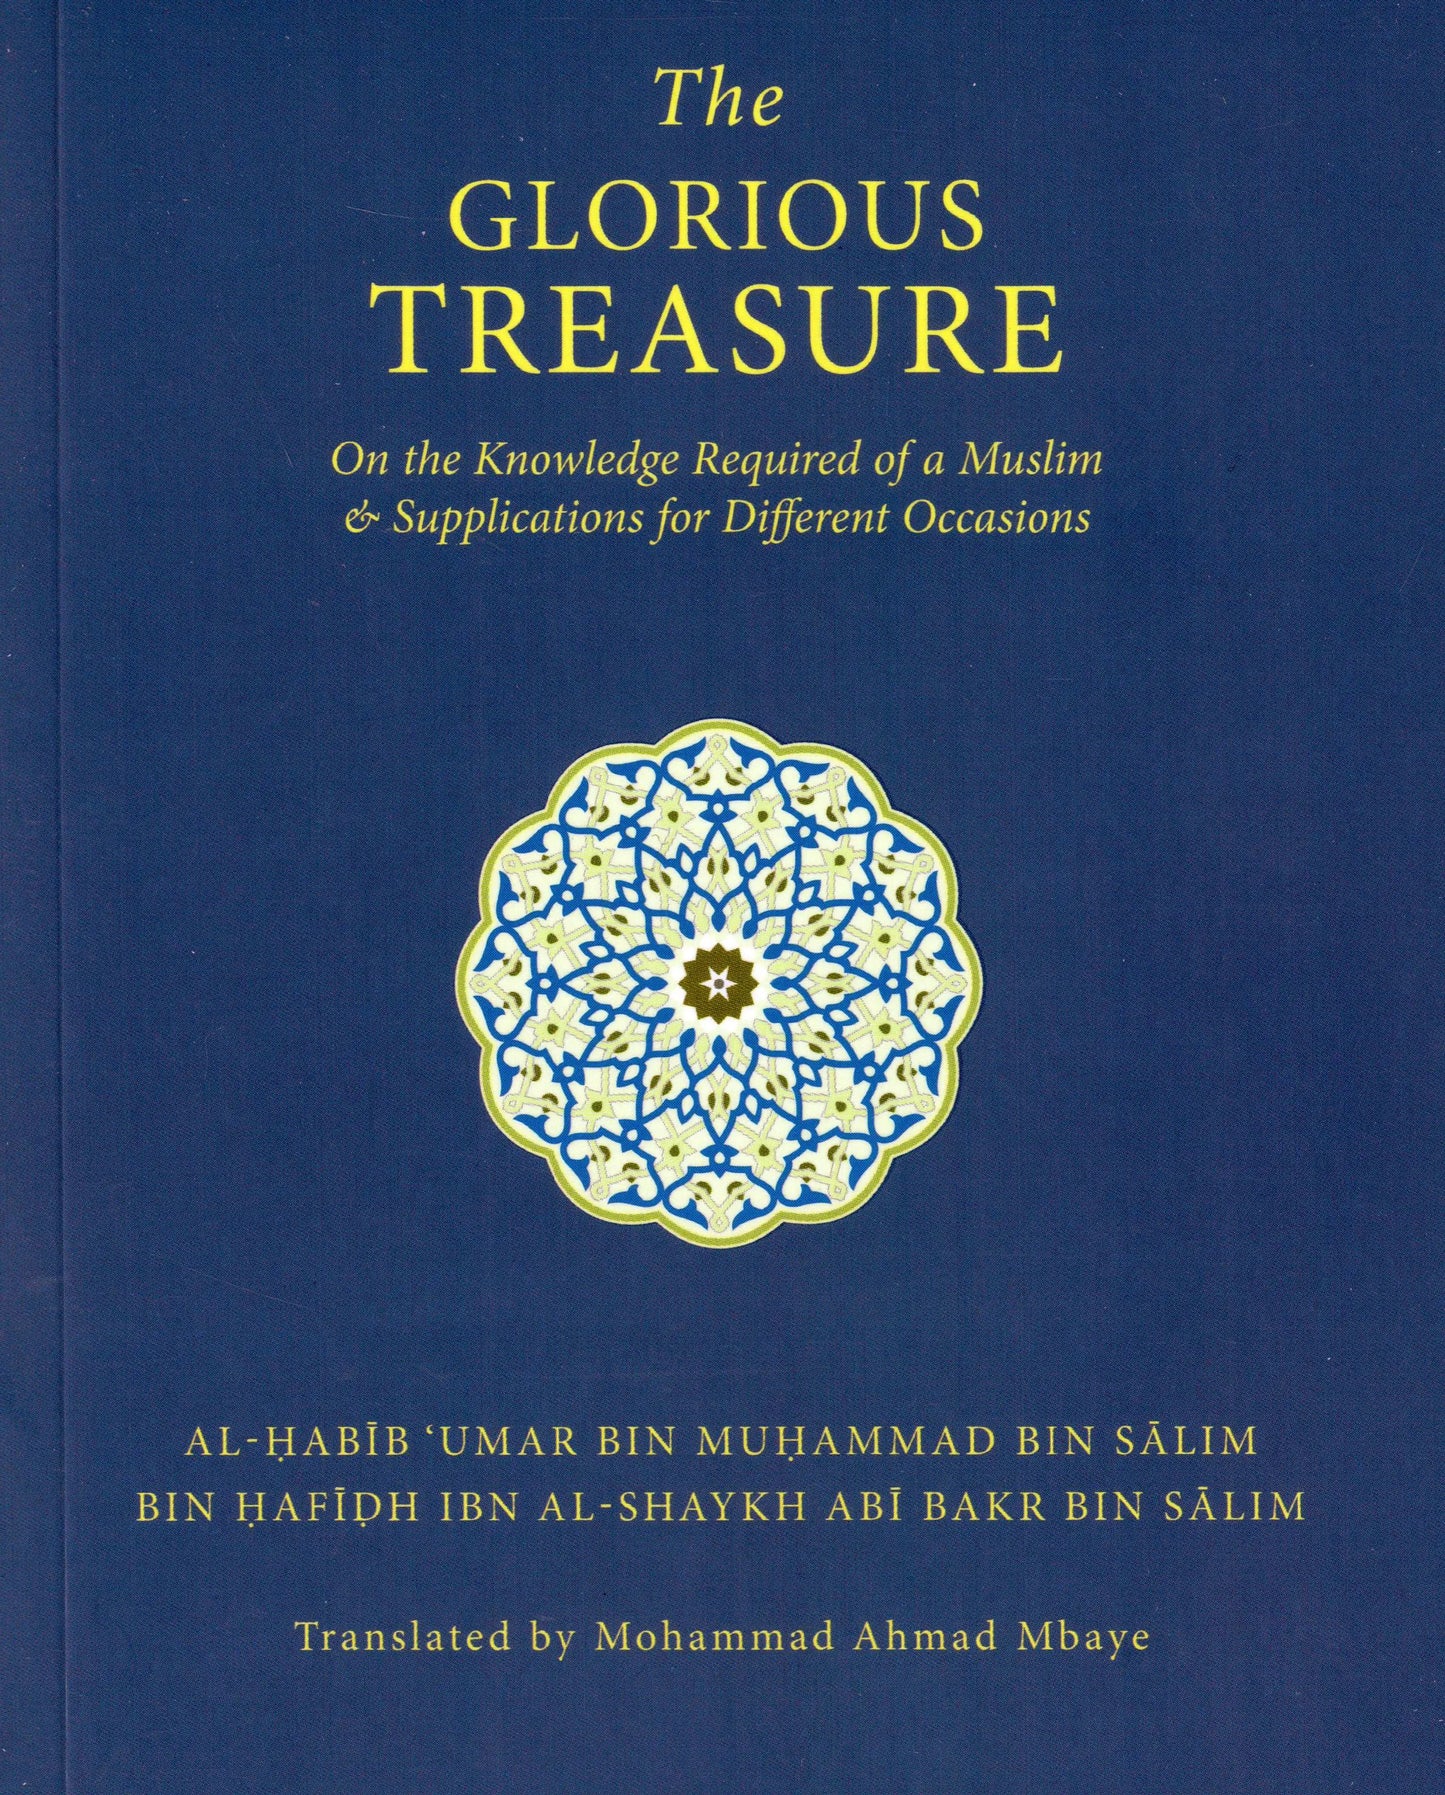 The Glorious Treasure: On the Knowledge Required of a Muslim & Supplications for Different Occasions